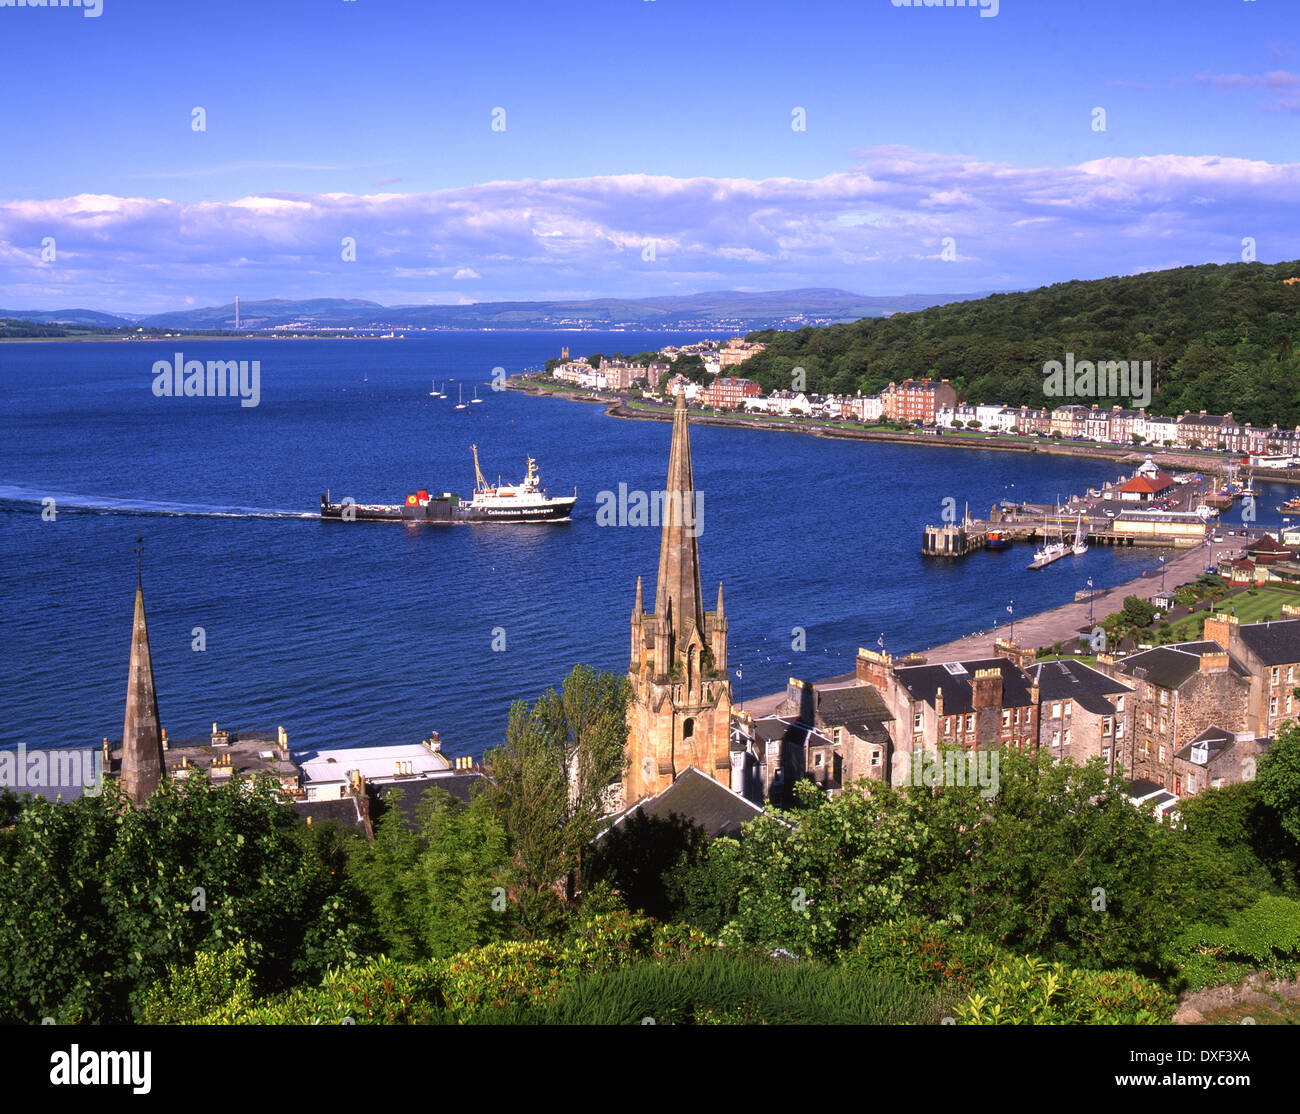 Rothesay bay and town with Clyde ferry in view, Isle of Bute, Argyll. Stock Photo